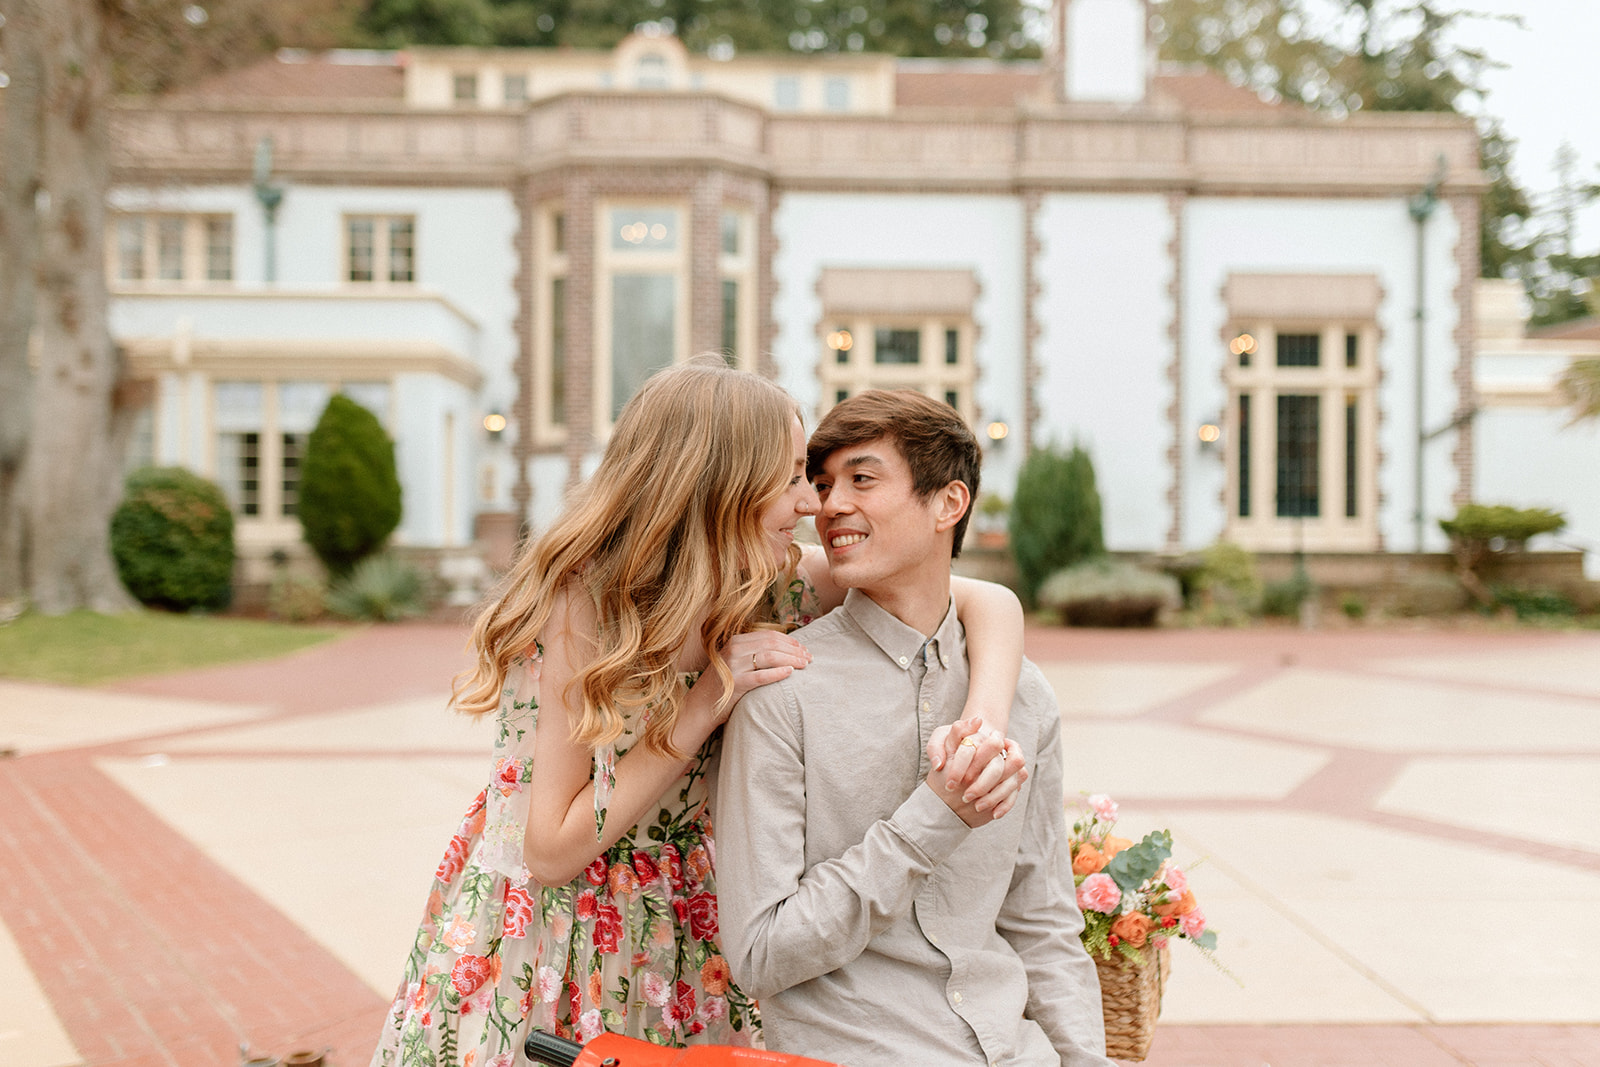 Dreamy couples photography session at Lairmont Manor